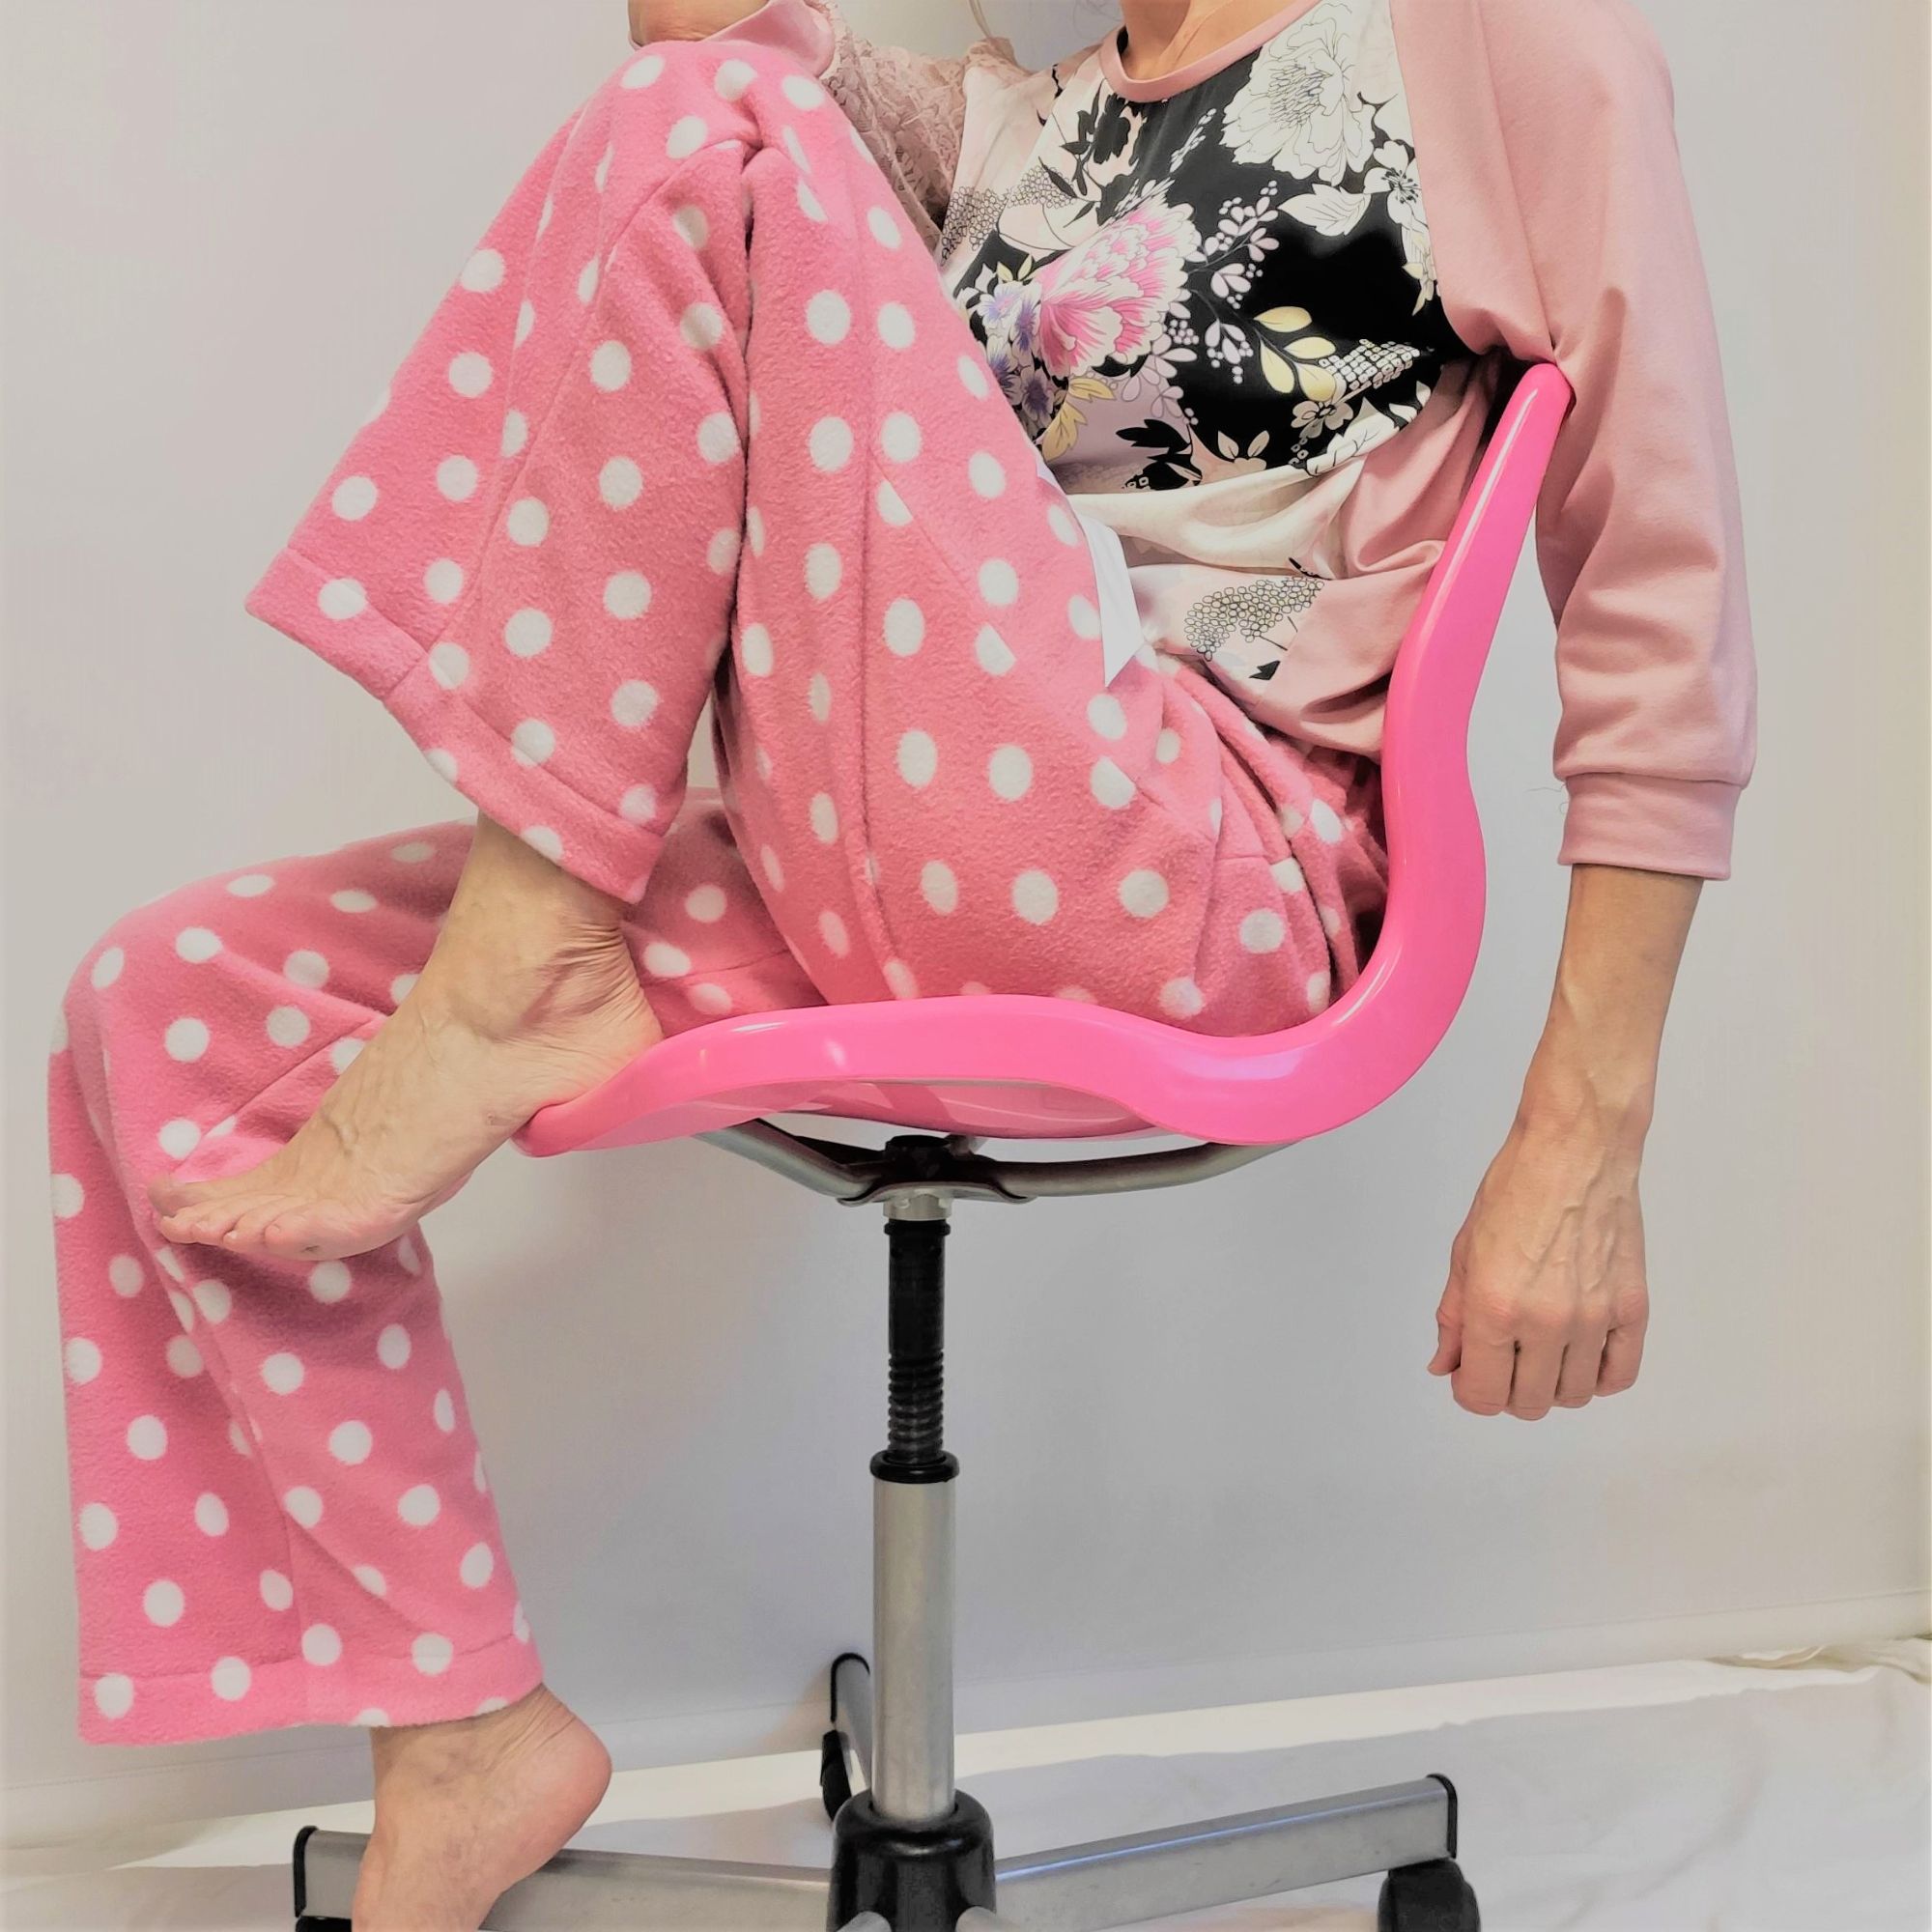 Pyjama trousers or shorts sewing projects at Sew In Brighton